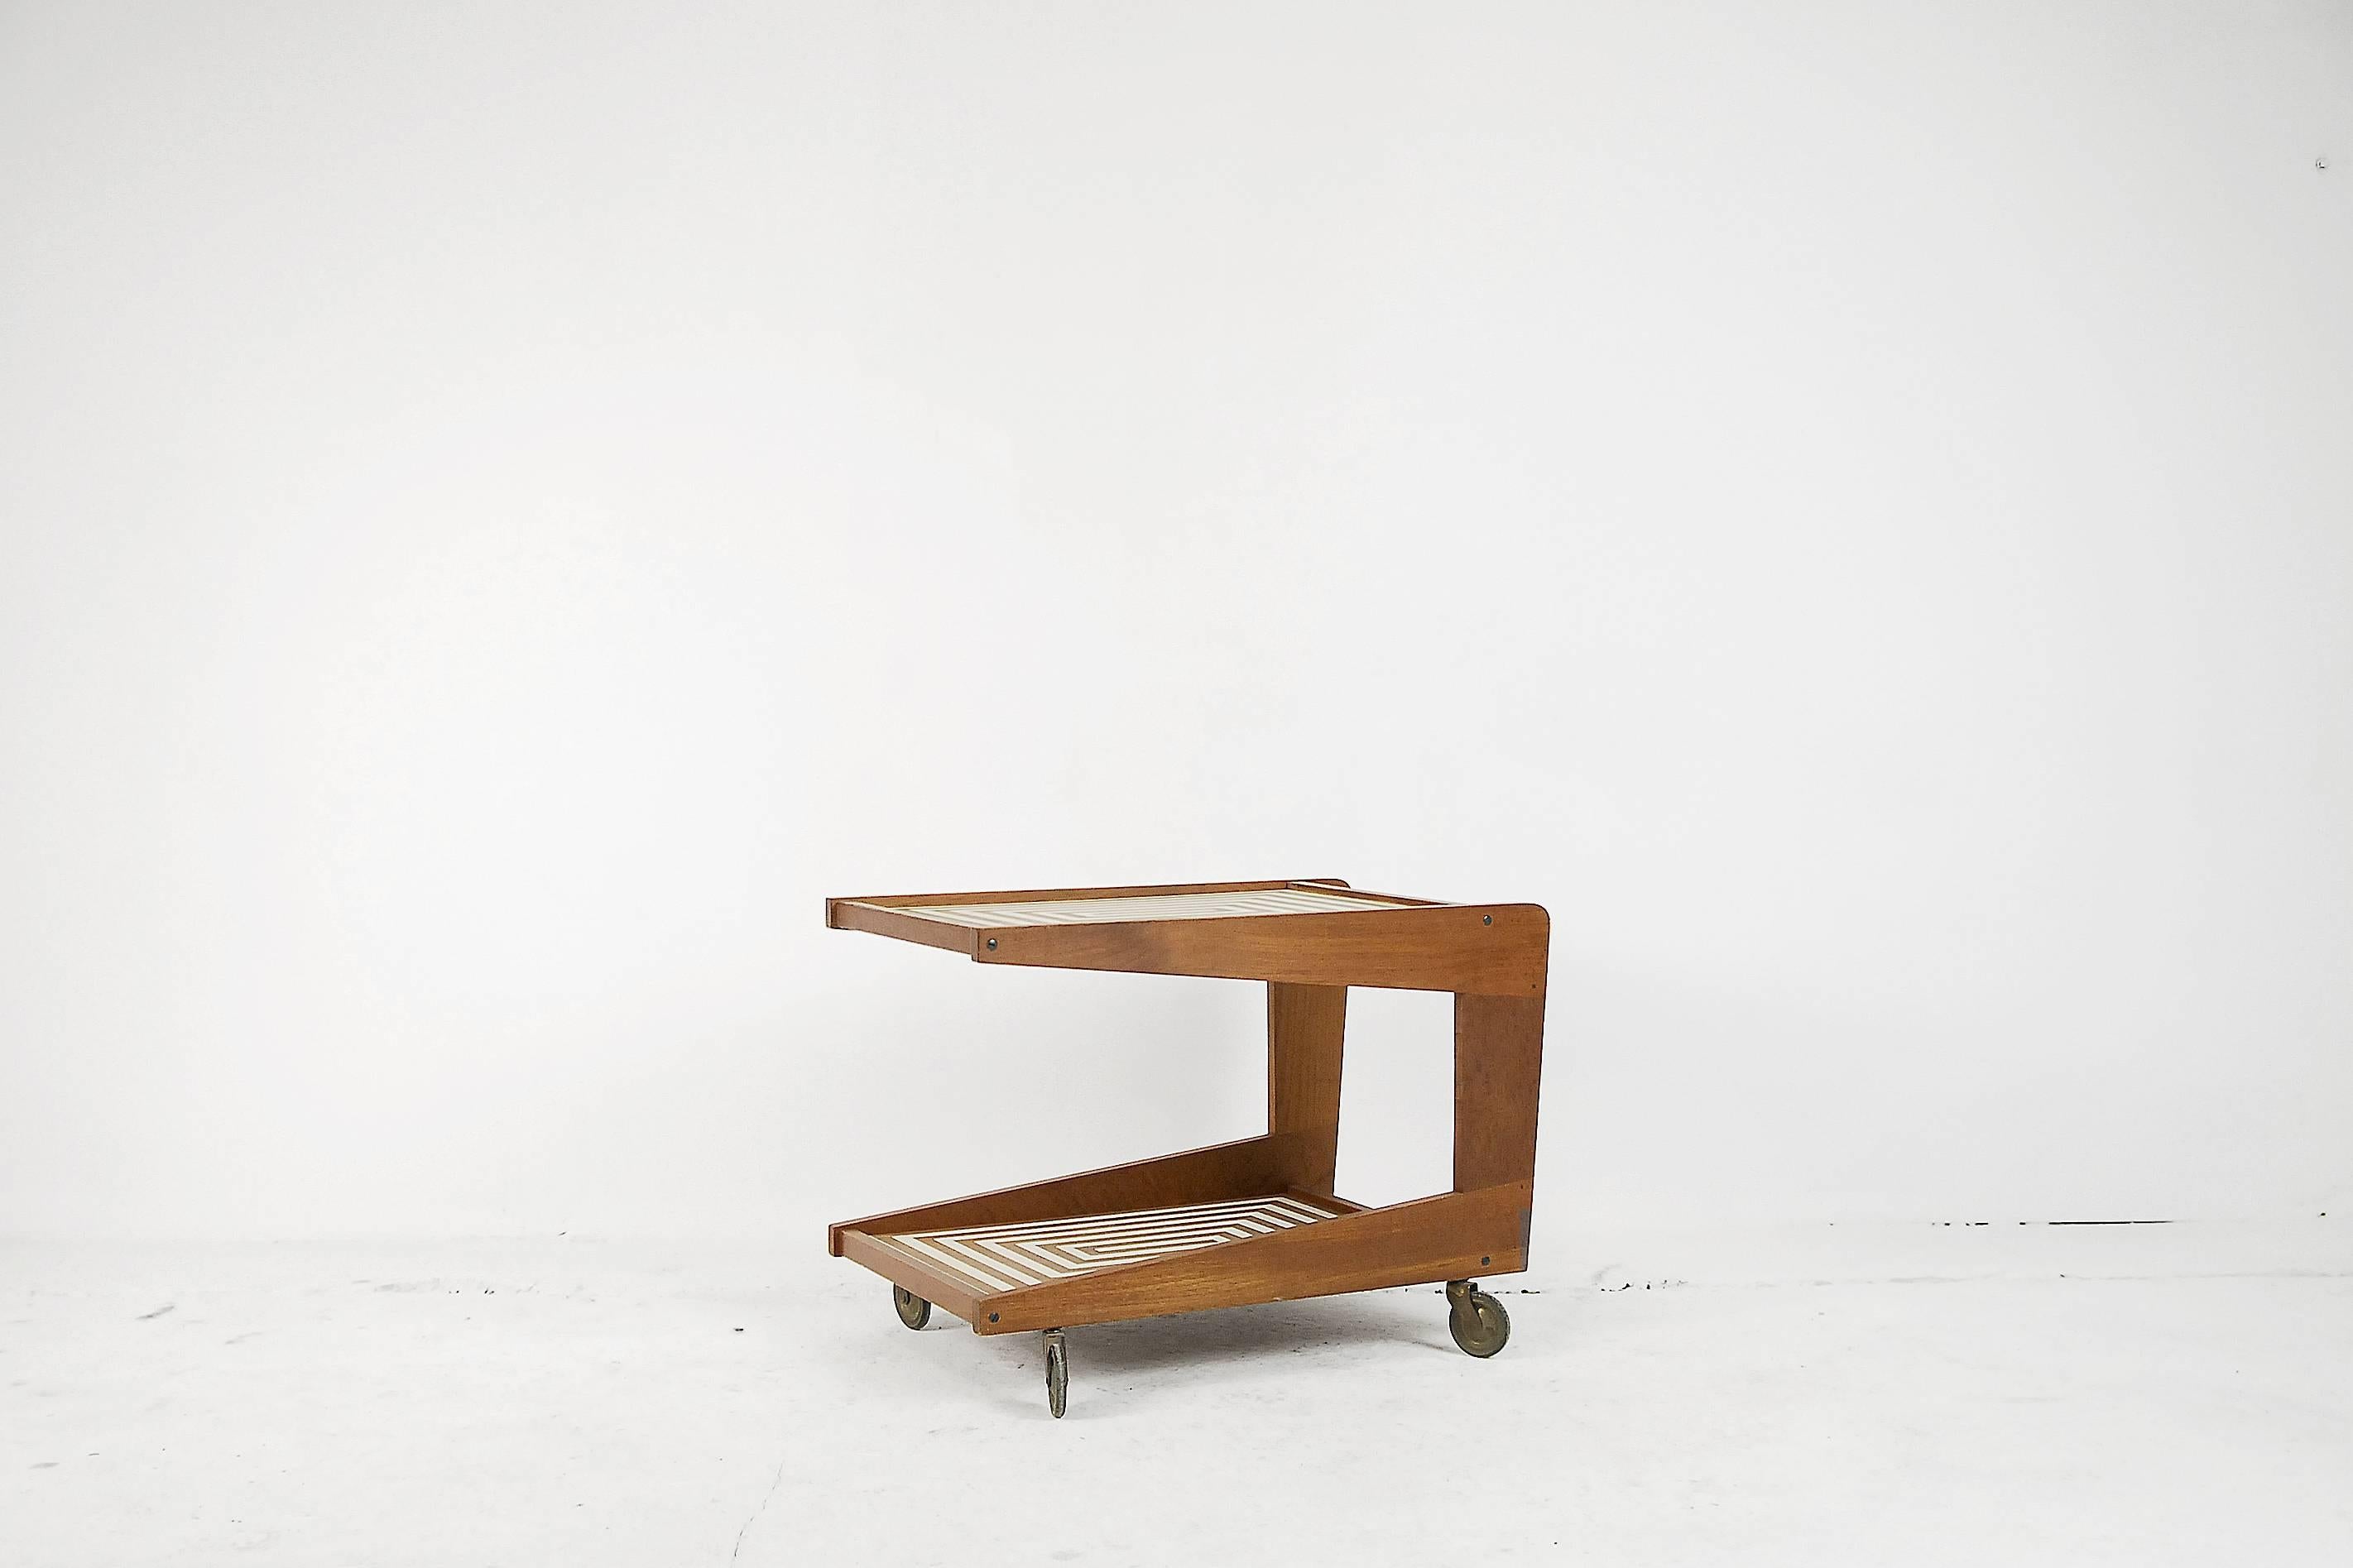 This cocktail trolley in solid teak was manufactured in Denmark, during the 1960s. It has two table tops with a hand-painted labyrinth pattern in midcentury style.